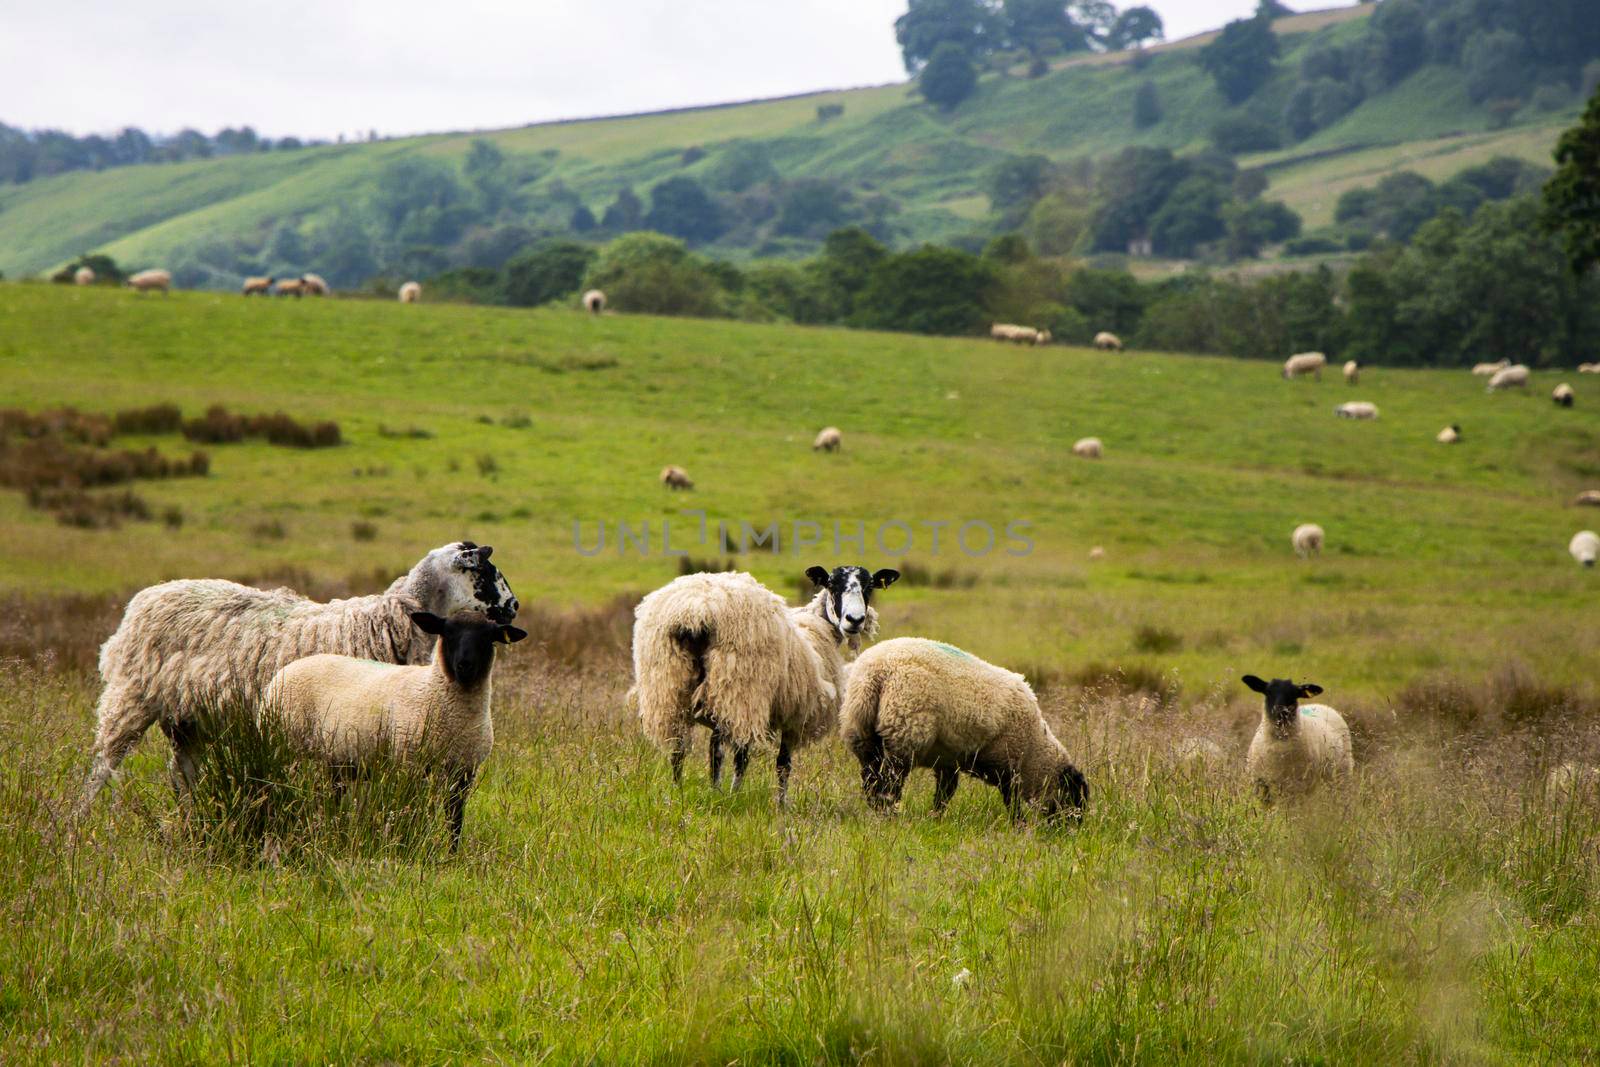 Small group of Swaledale sheep grazing in a grassy field with hills in background in North Yorkshire, England, UK. Shot on Canon EOS 90D.